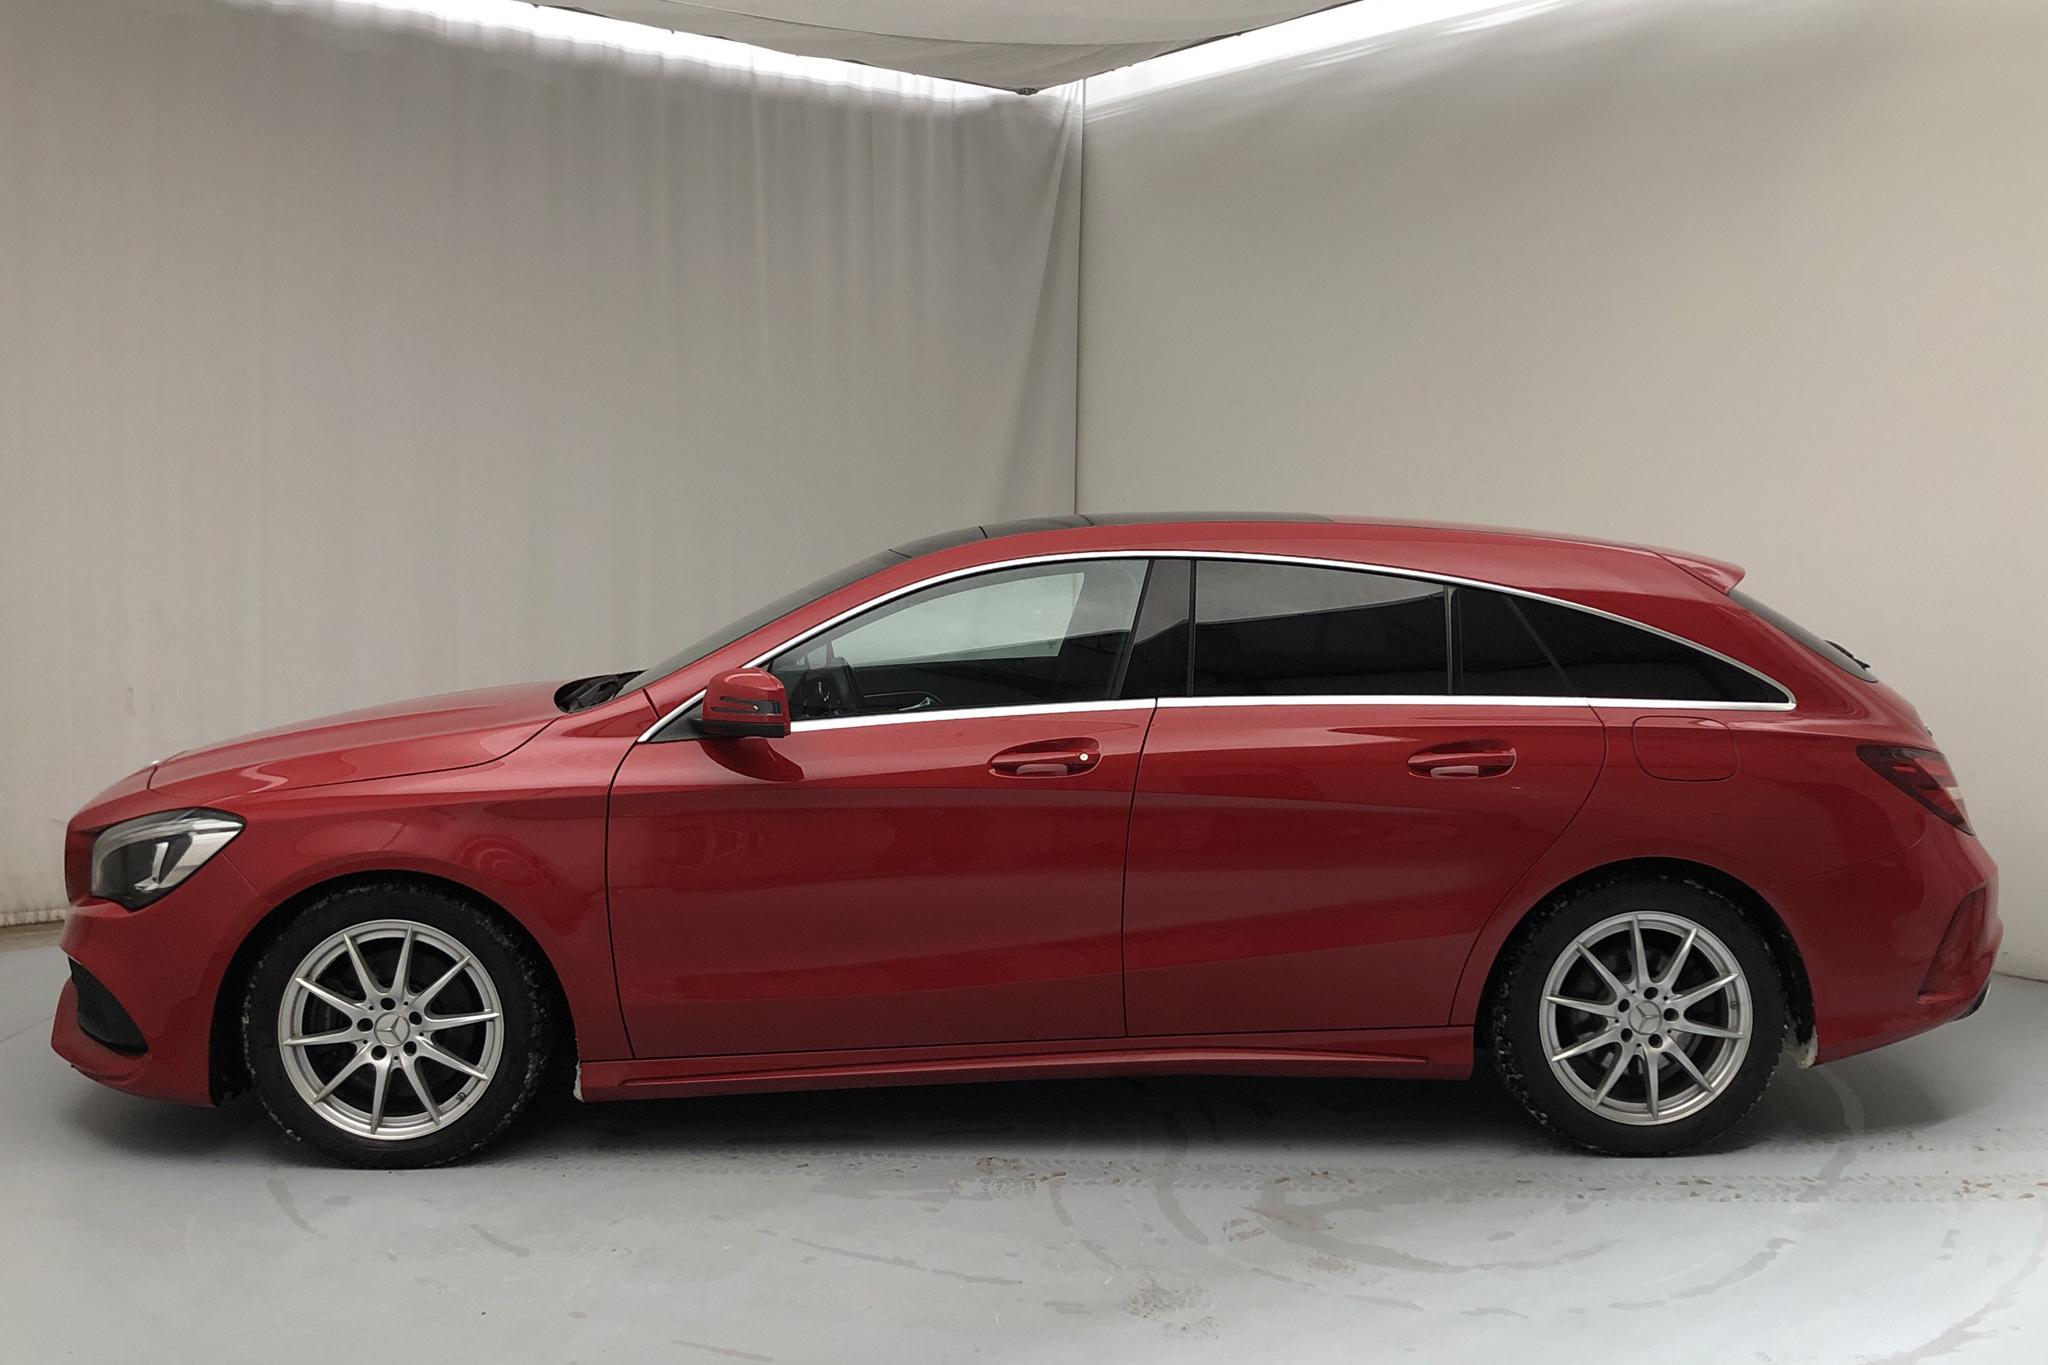 Mercedes CLA 220 d 4MATIC Shooting Brake X117 (177hk) - 84 570 km - Automatic - red - 2018